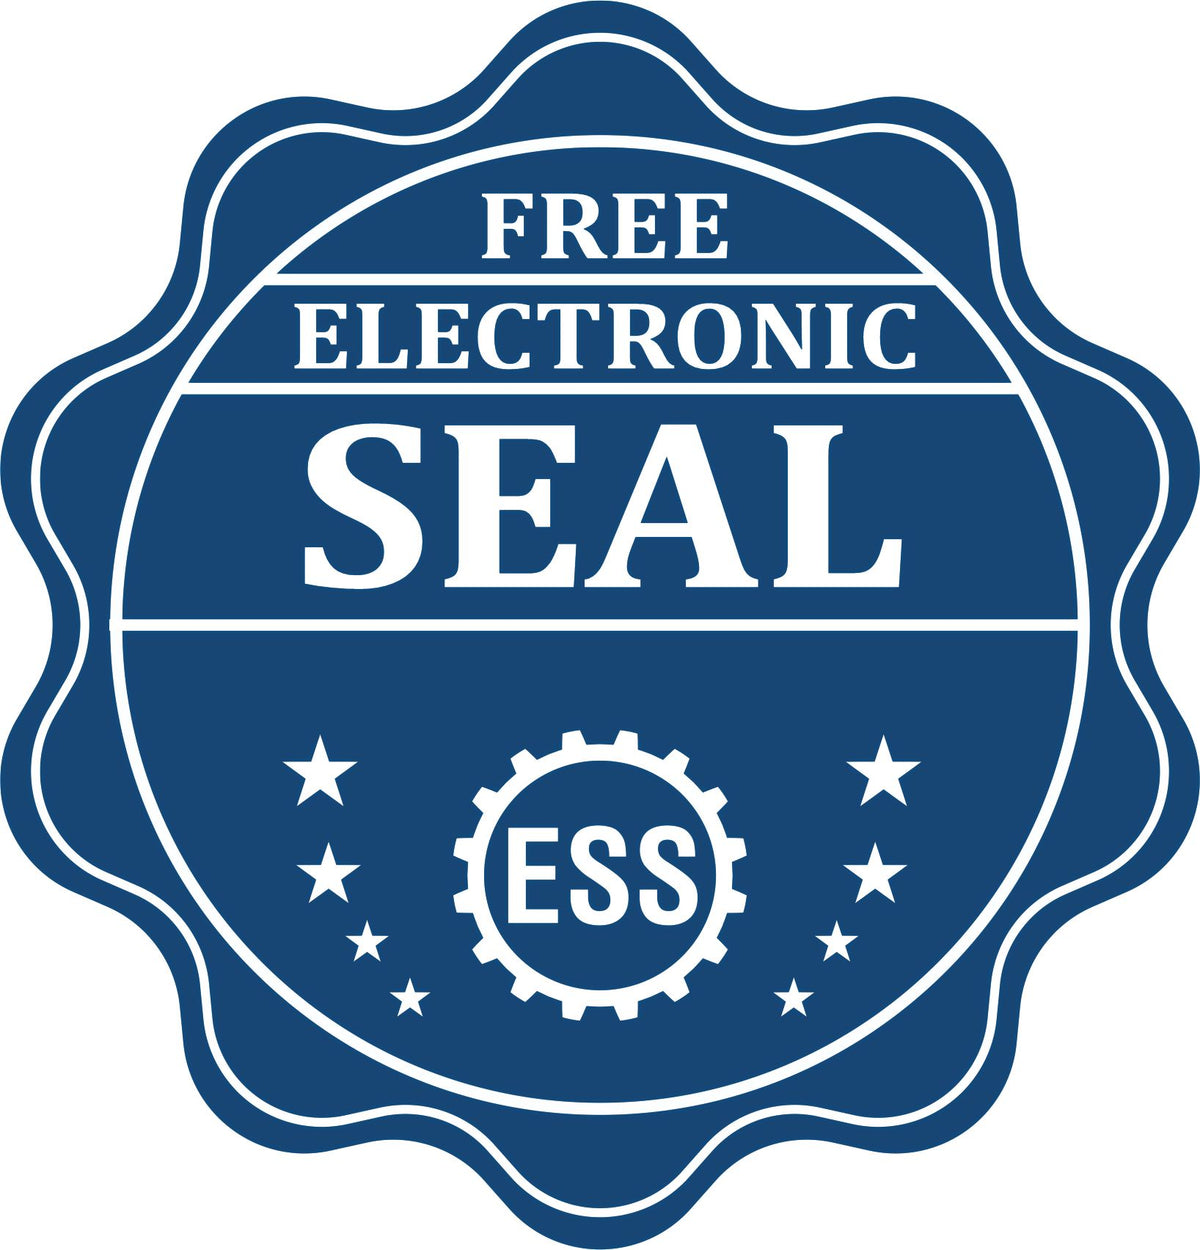 A badge showing a free electronic seal for the Premium MaxLight Pre-Inked Georgia Geology Stamp with stars and the ESS gear on the emblem.